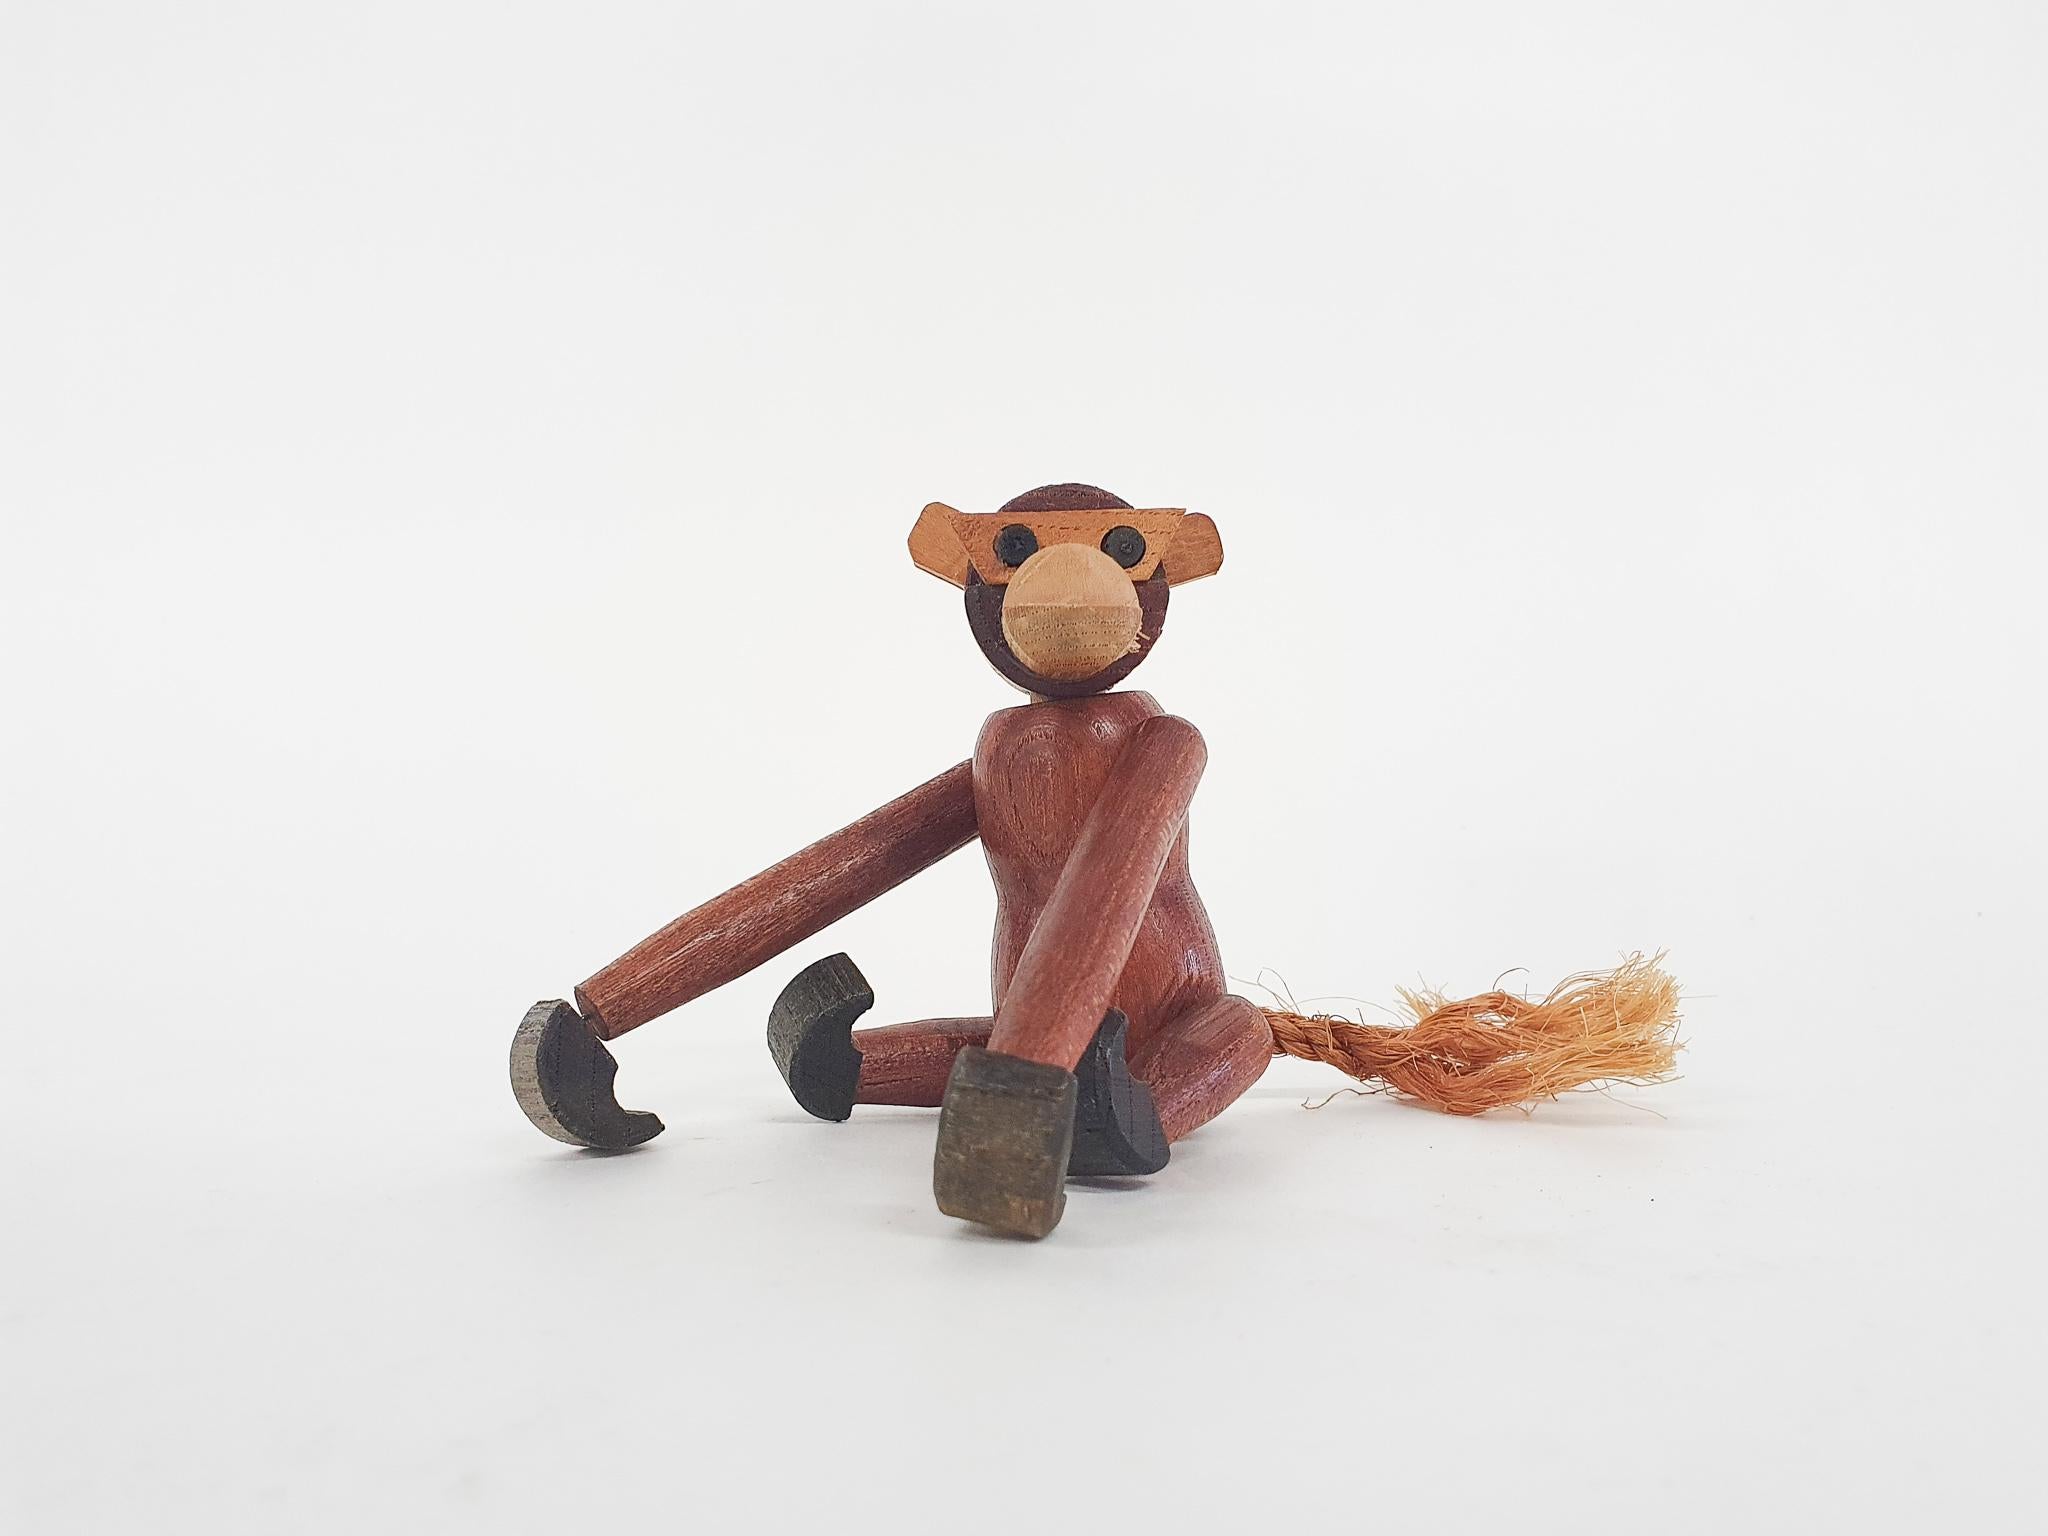 Wooden Monkey with rope tale, in the style of Kay Bojesen.
The arms, legs and head can be turned.